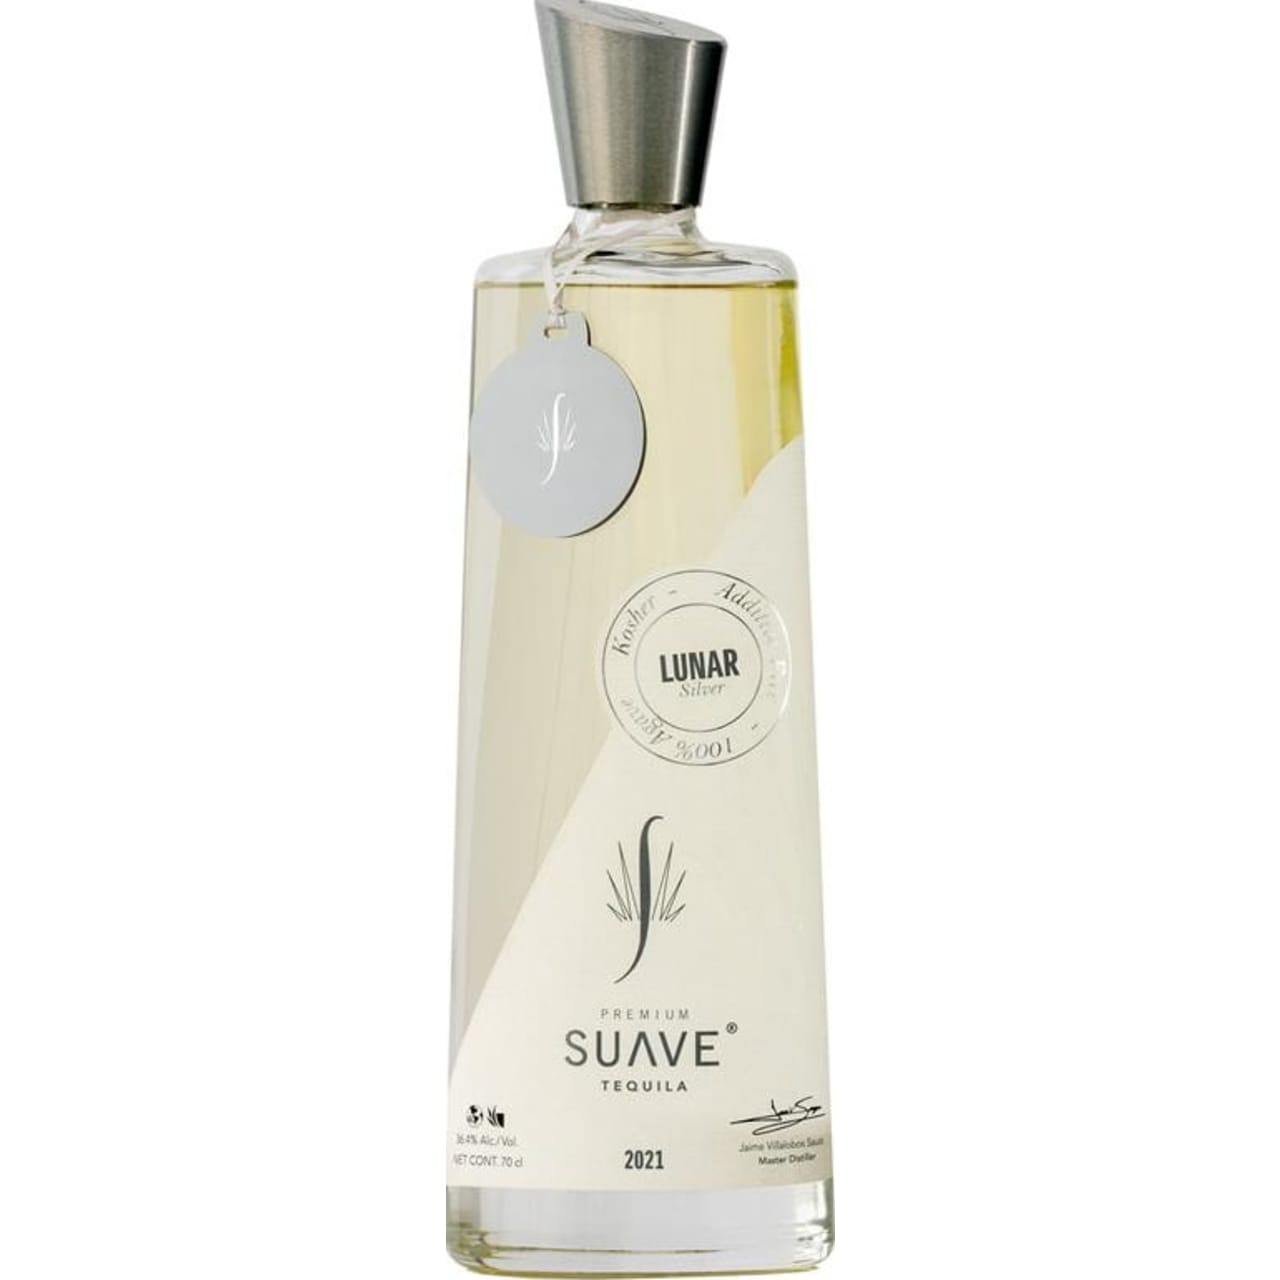 Product Image - Suave Lunar Tequila